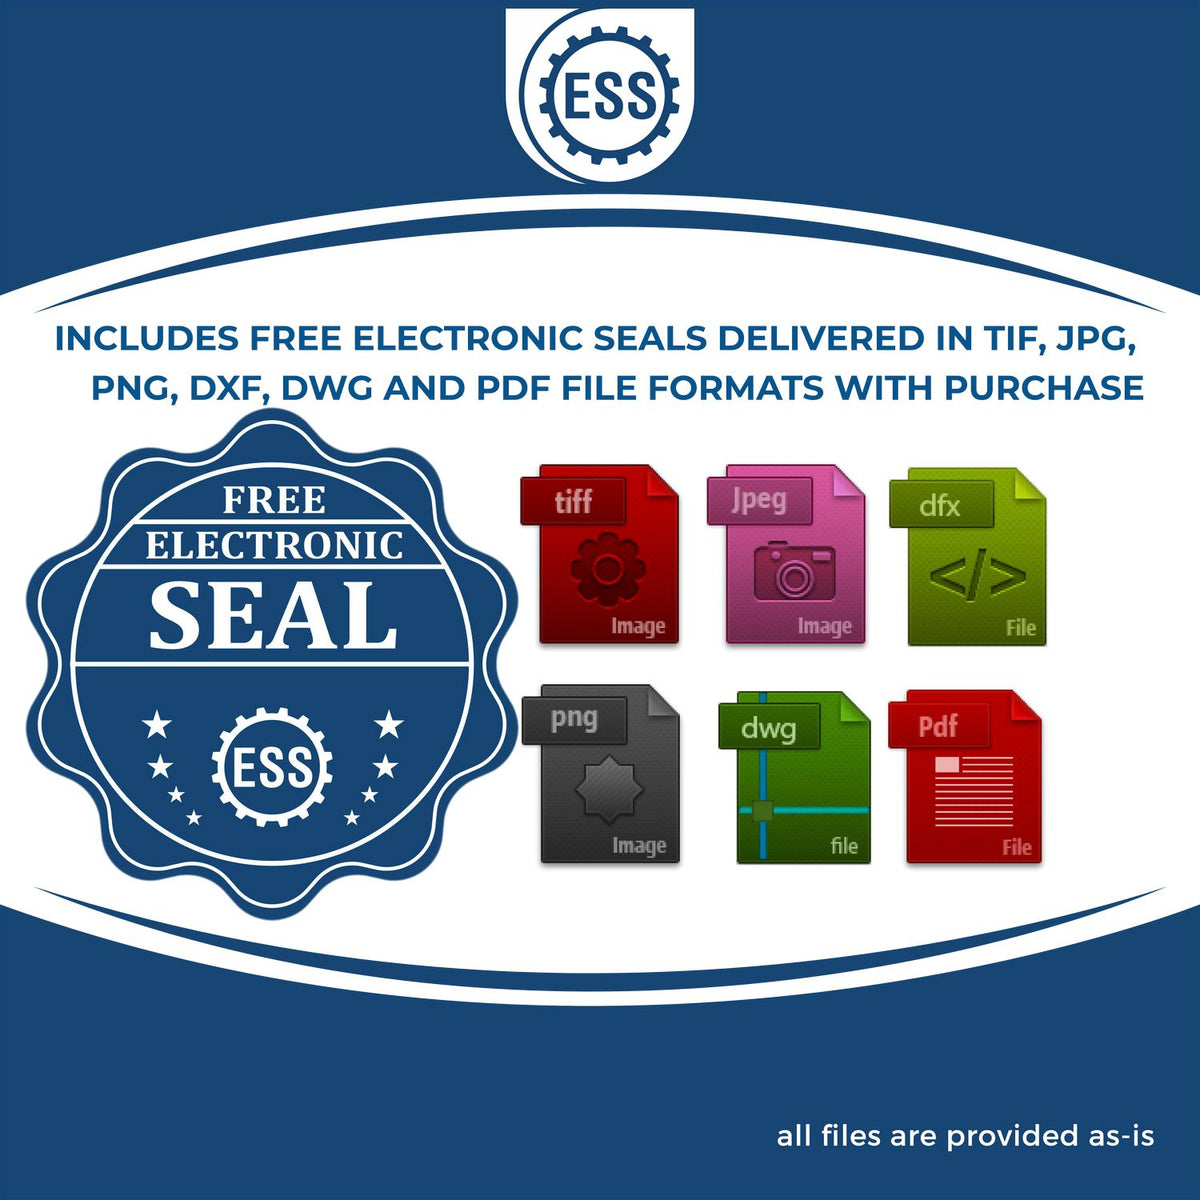 An infographic for the free electronic seal for the Maine Desk Architect Embossing Seal illustrating the different file type icons such as DXF, DWG, TIF, JPG and PNG.